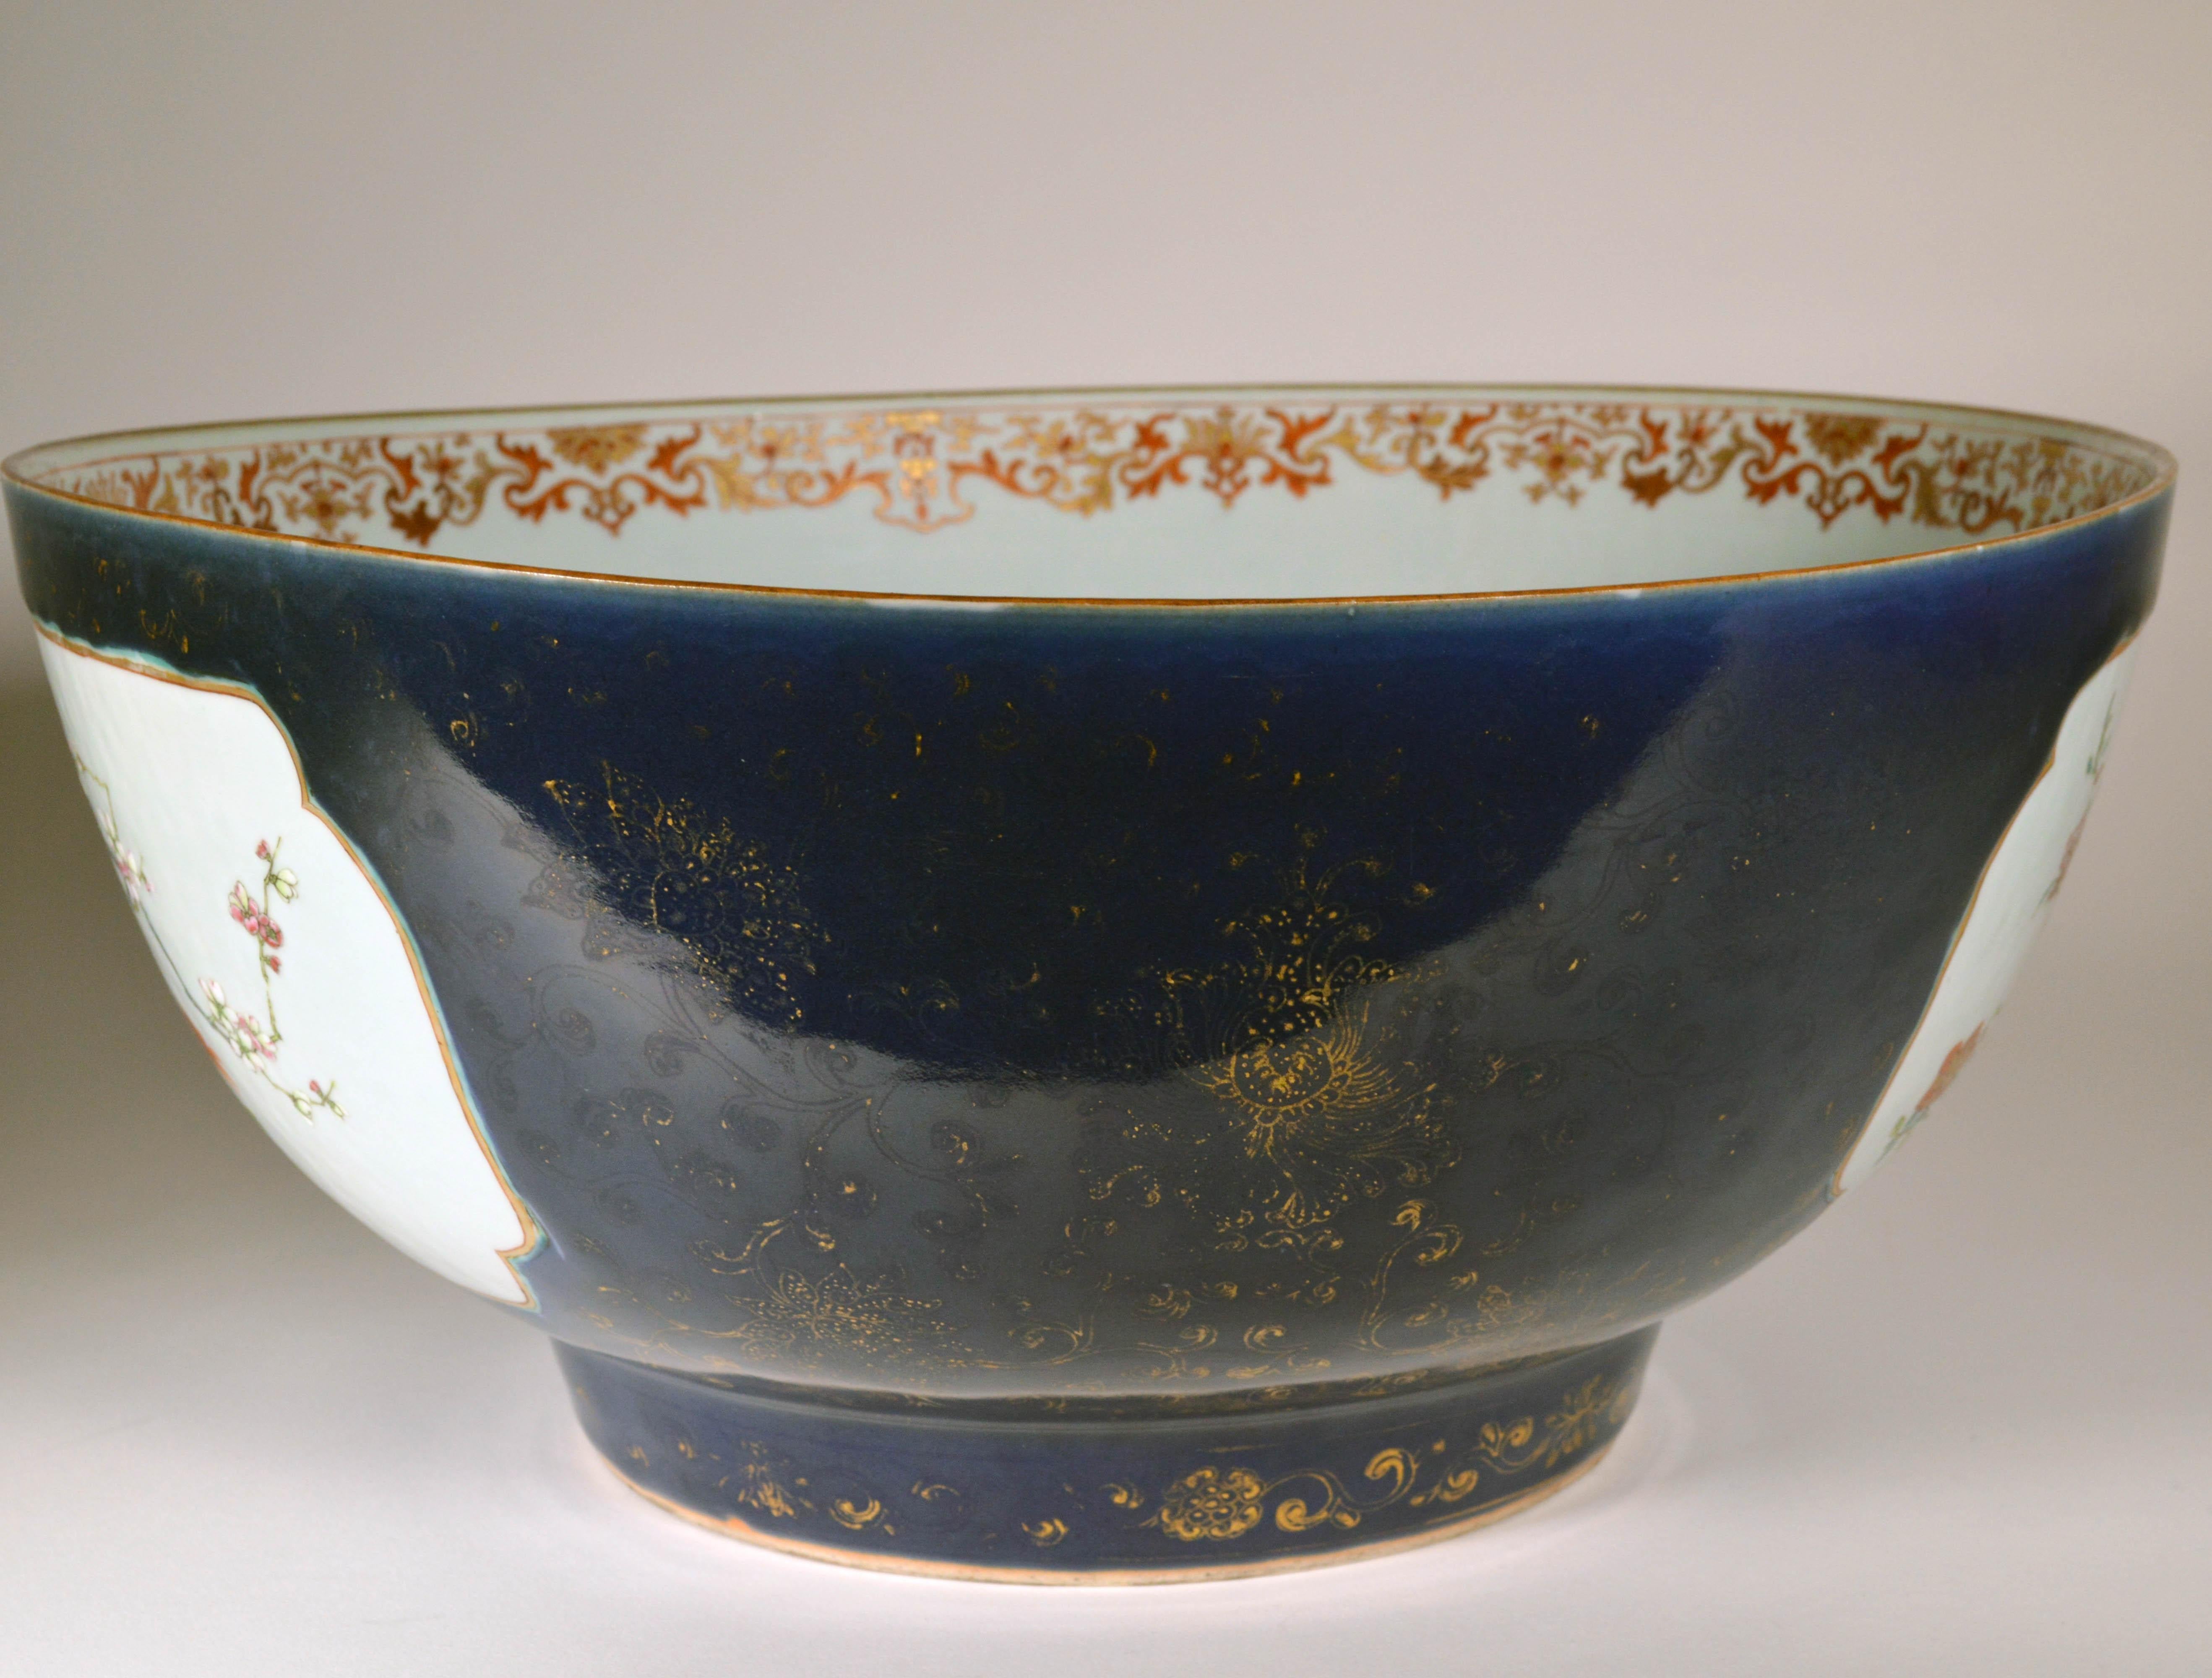 Chinese Export Porcelain large “Famille Rose” punch bowl with mazarine blue and gilt ground, 
circa 1760-1970
  

The large Chinese Export punch bowl is finely painted on the interior with “famille rose” plants and flowers and a wide rococo